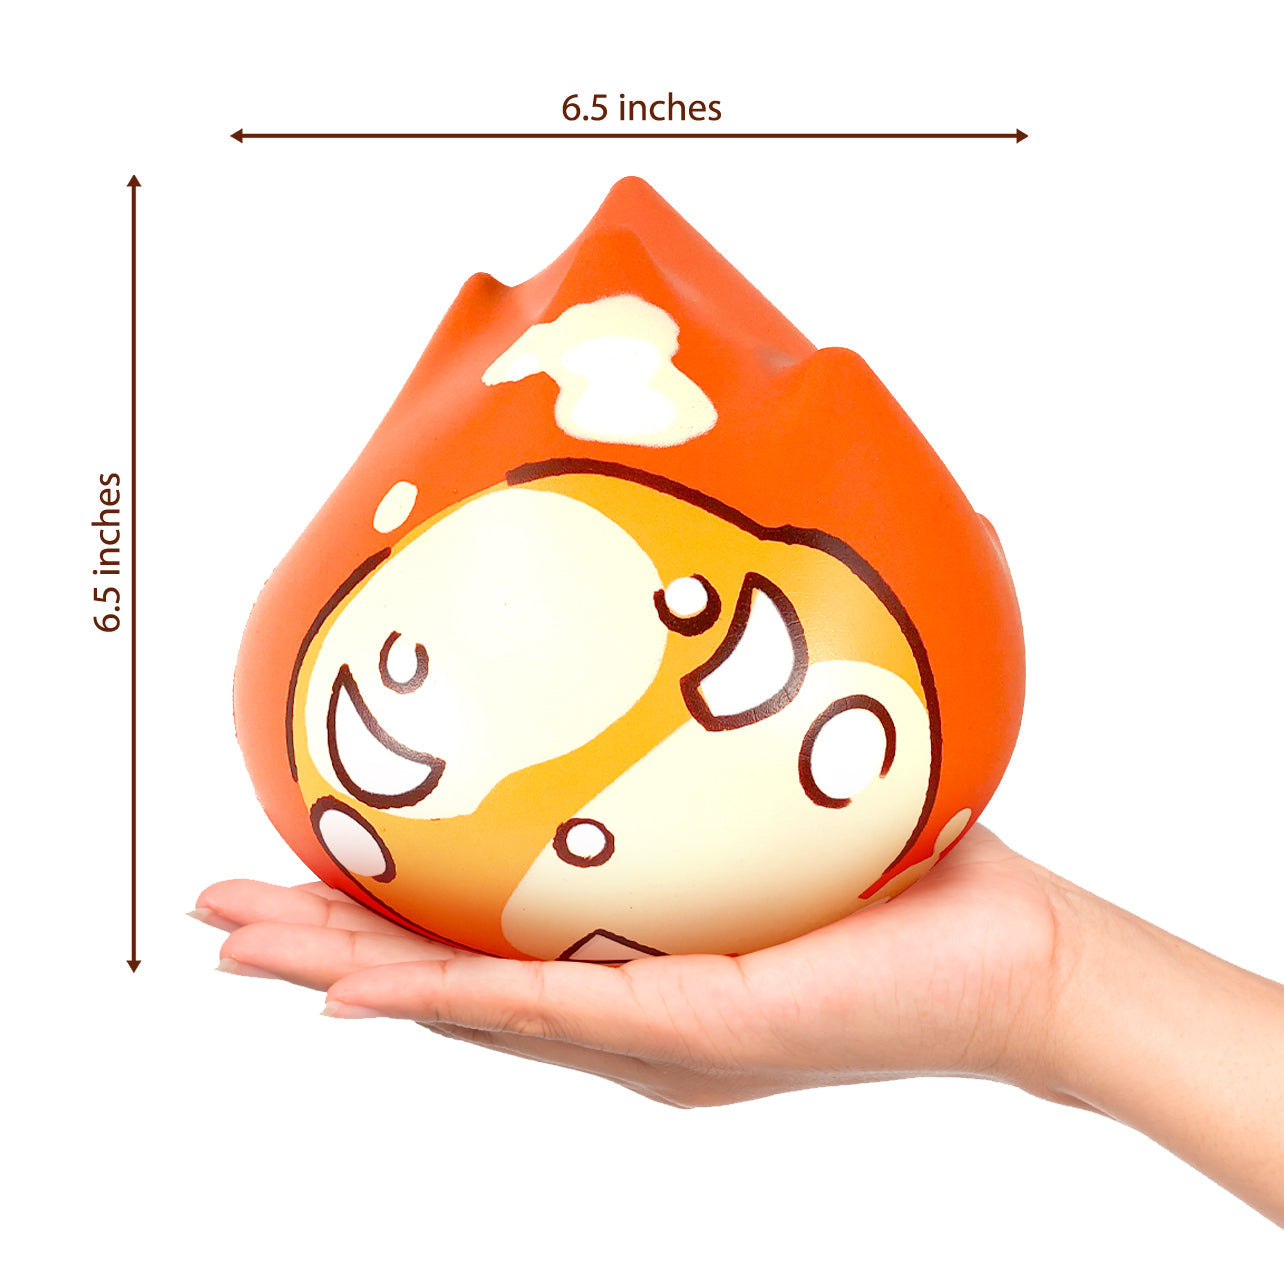 Fire Force - Sputter Stress Ball image count 4